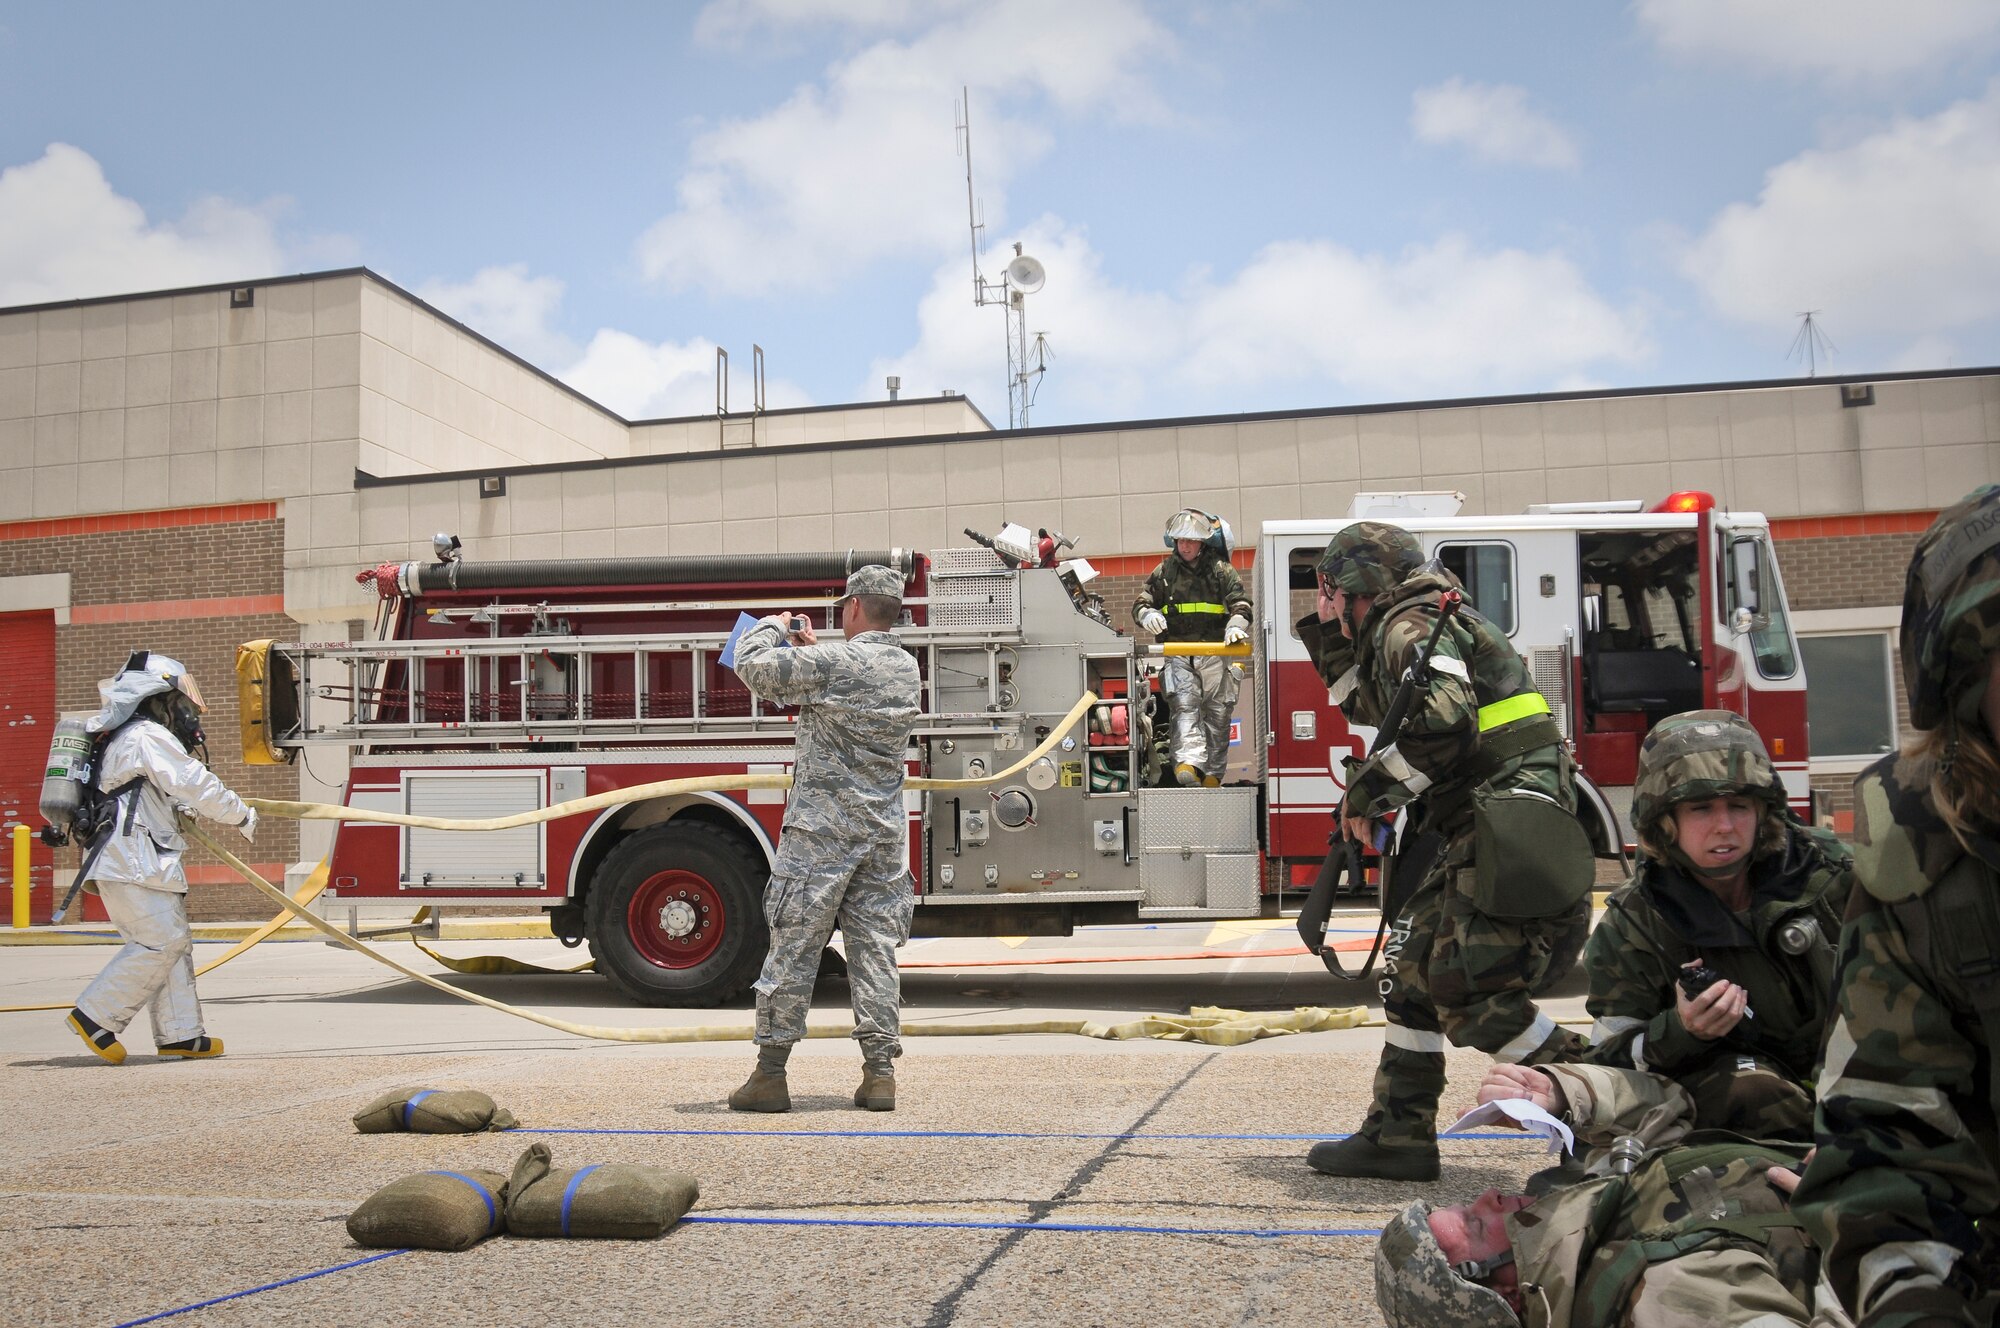 Members of the 123rd Airlift Wing Fire Department respond to a simulated fire at the Gulfport Combat Readiness Training Center in Gulfport, Miss., on May 20, 2010. The wing and two other units were being evaluated by the Air Mobility Command Inspector General as part of the first-ever homeland security/homeland defense Operational Readiness Inspection. (U.S. Air Force photo/Tech. Sgt. Dennis Flora) (Released)